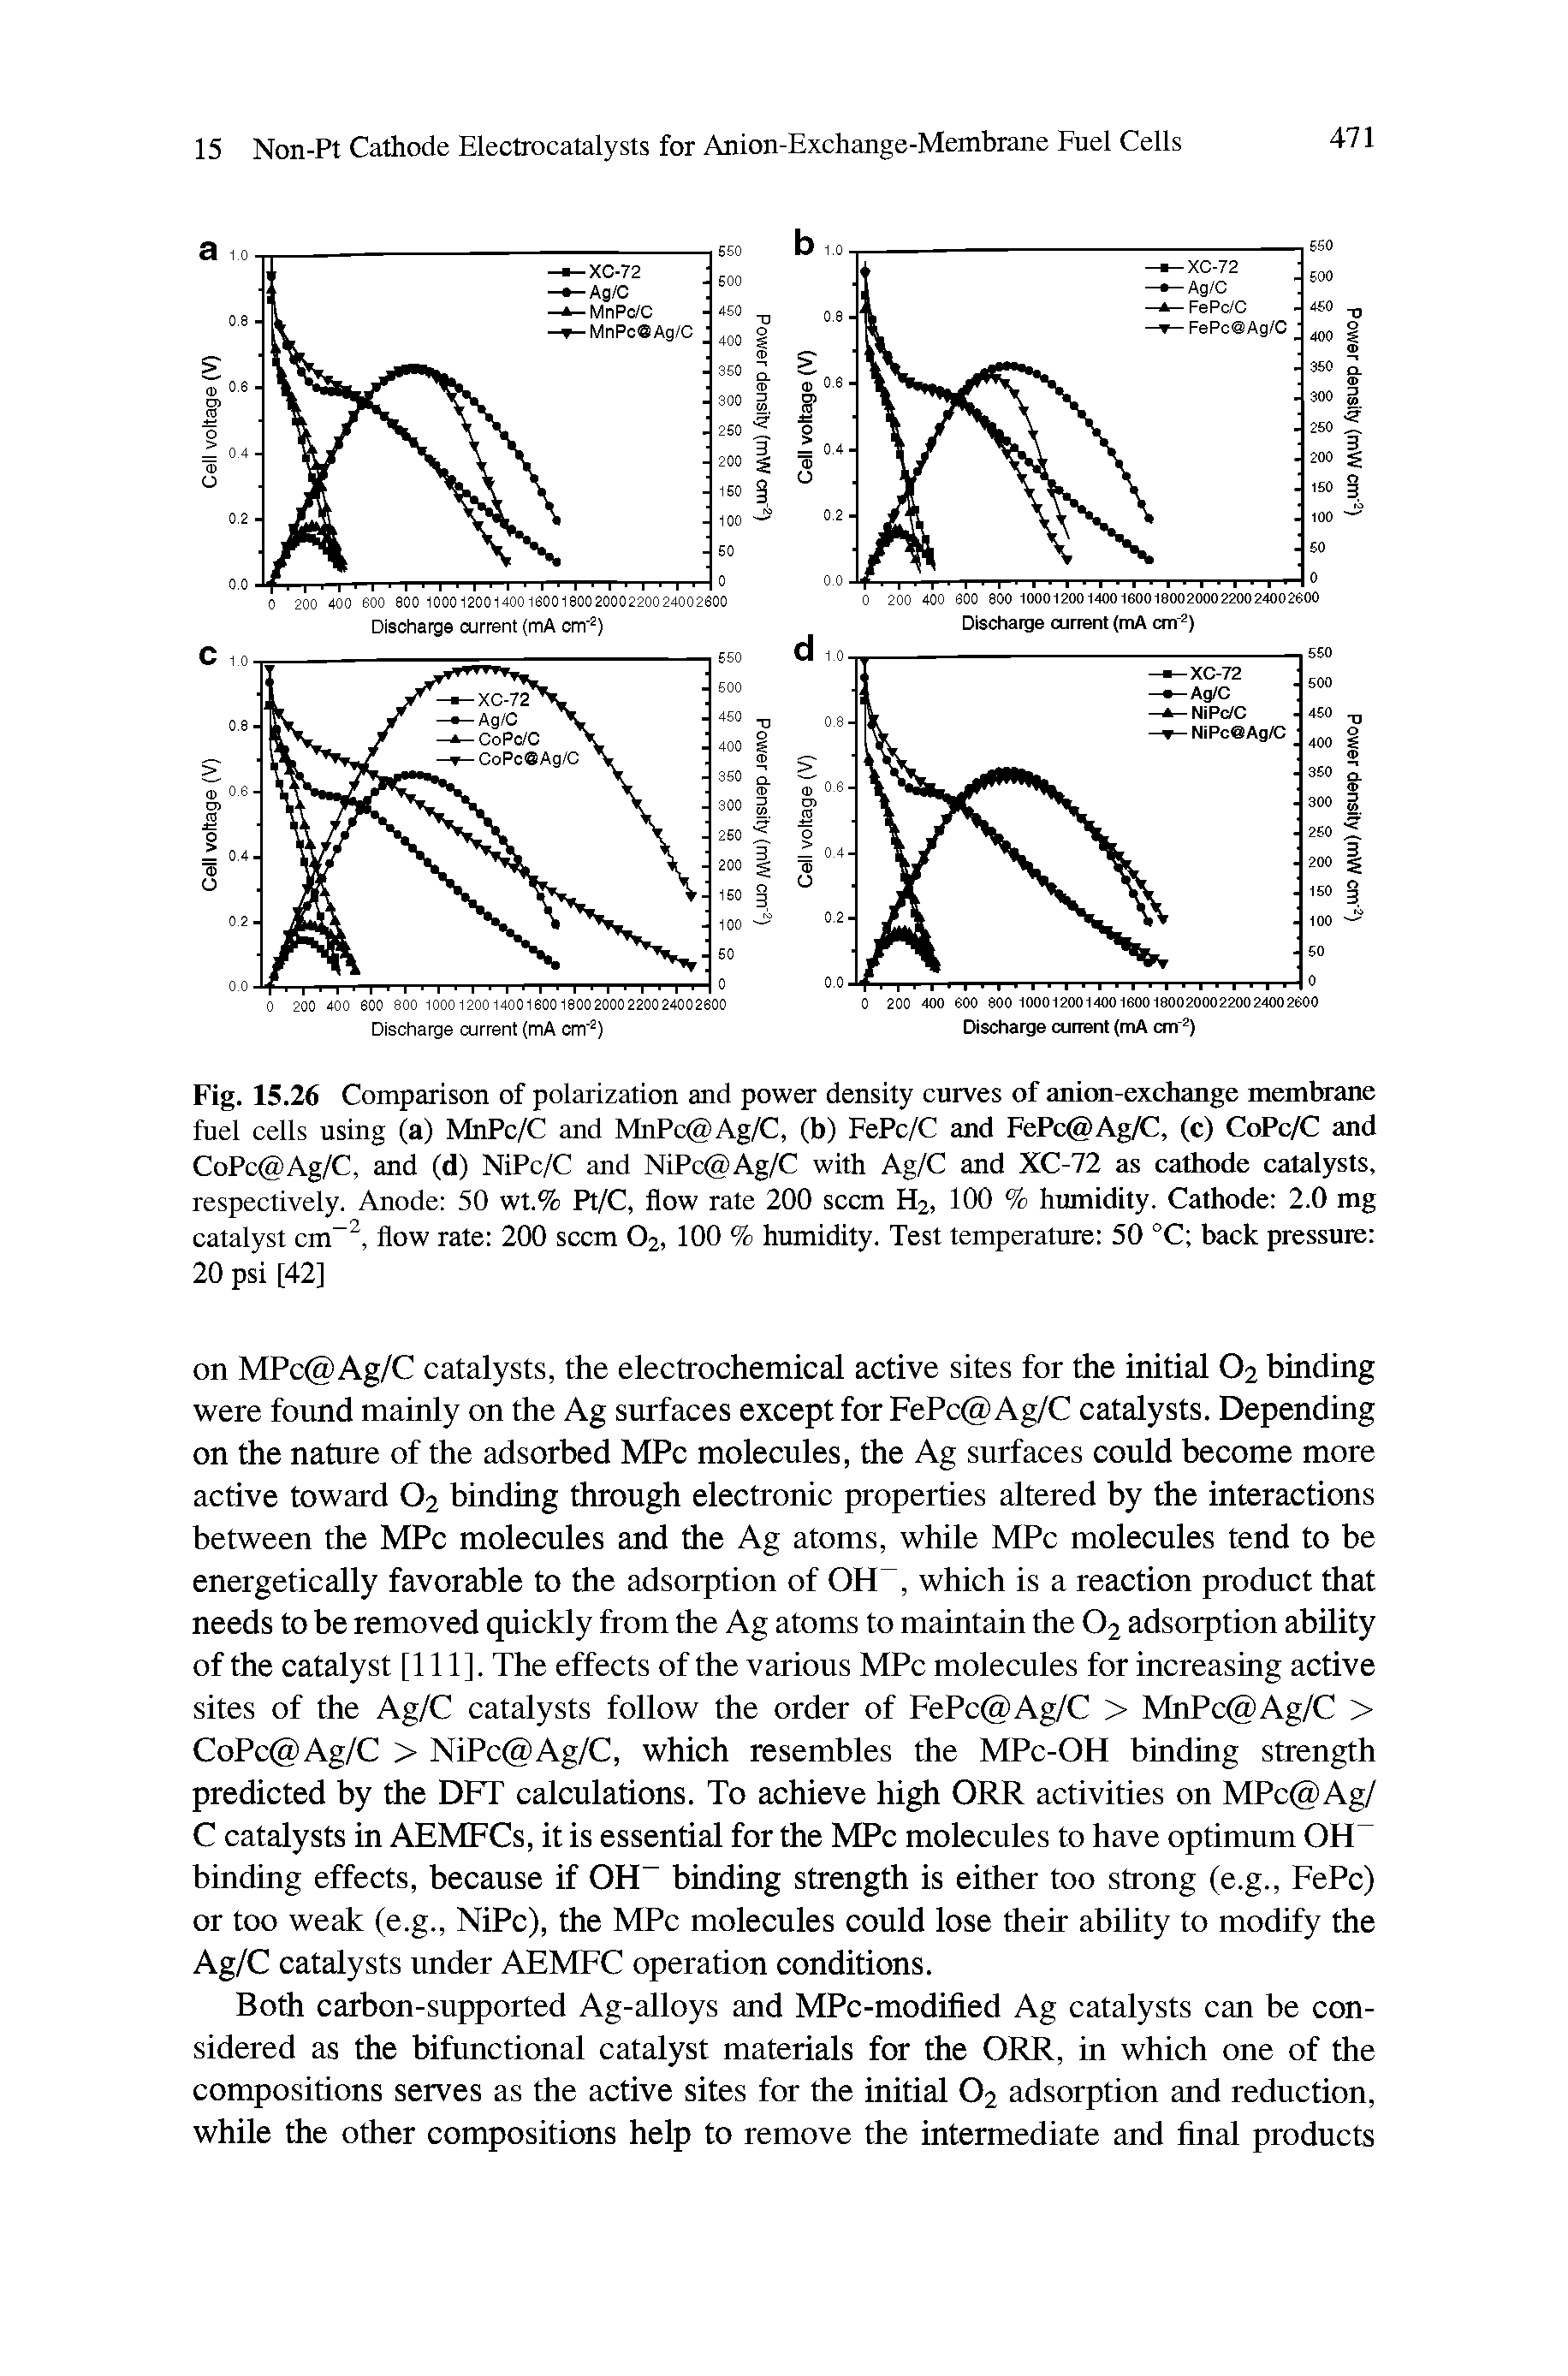 Fig. 15.26 Comparison of polarization and power density curves of anion-exchange membrane fuel cells using (a) MnPc/C and MnPc Ag/C, (b) FePc/C and FePc AgA2, (c) CoPc/C and CoPc Ag/C, and (d) NiPc/C and NiPc Ag/C with Ag/C and XC-72 as cathode catalysts, respectively. Anode 50 wt.% Pt/C, flow rate 200 seem H2, 100 % humidity. Cathode 2.0 mg catalyst cm , flow rate 200 seem O2, 100 % humidity. Test temperature 50 °C back pressure 20 psi [42]...